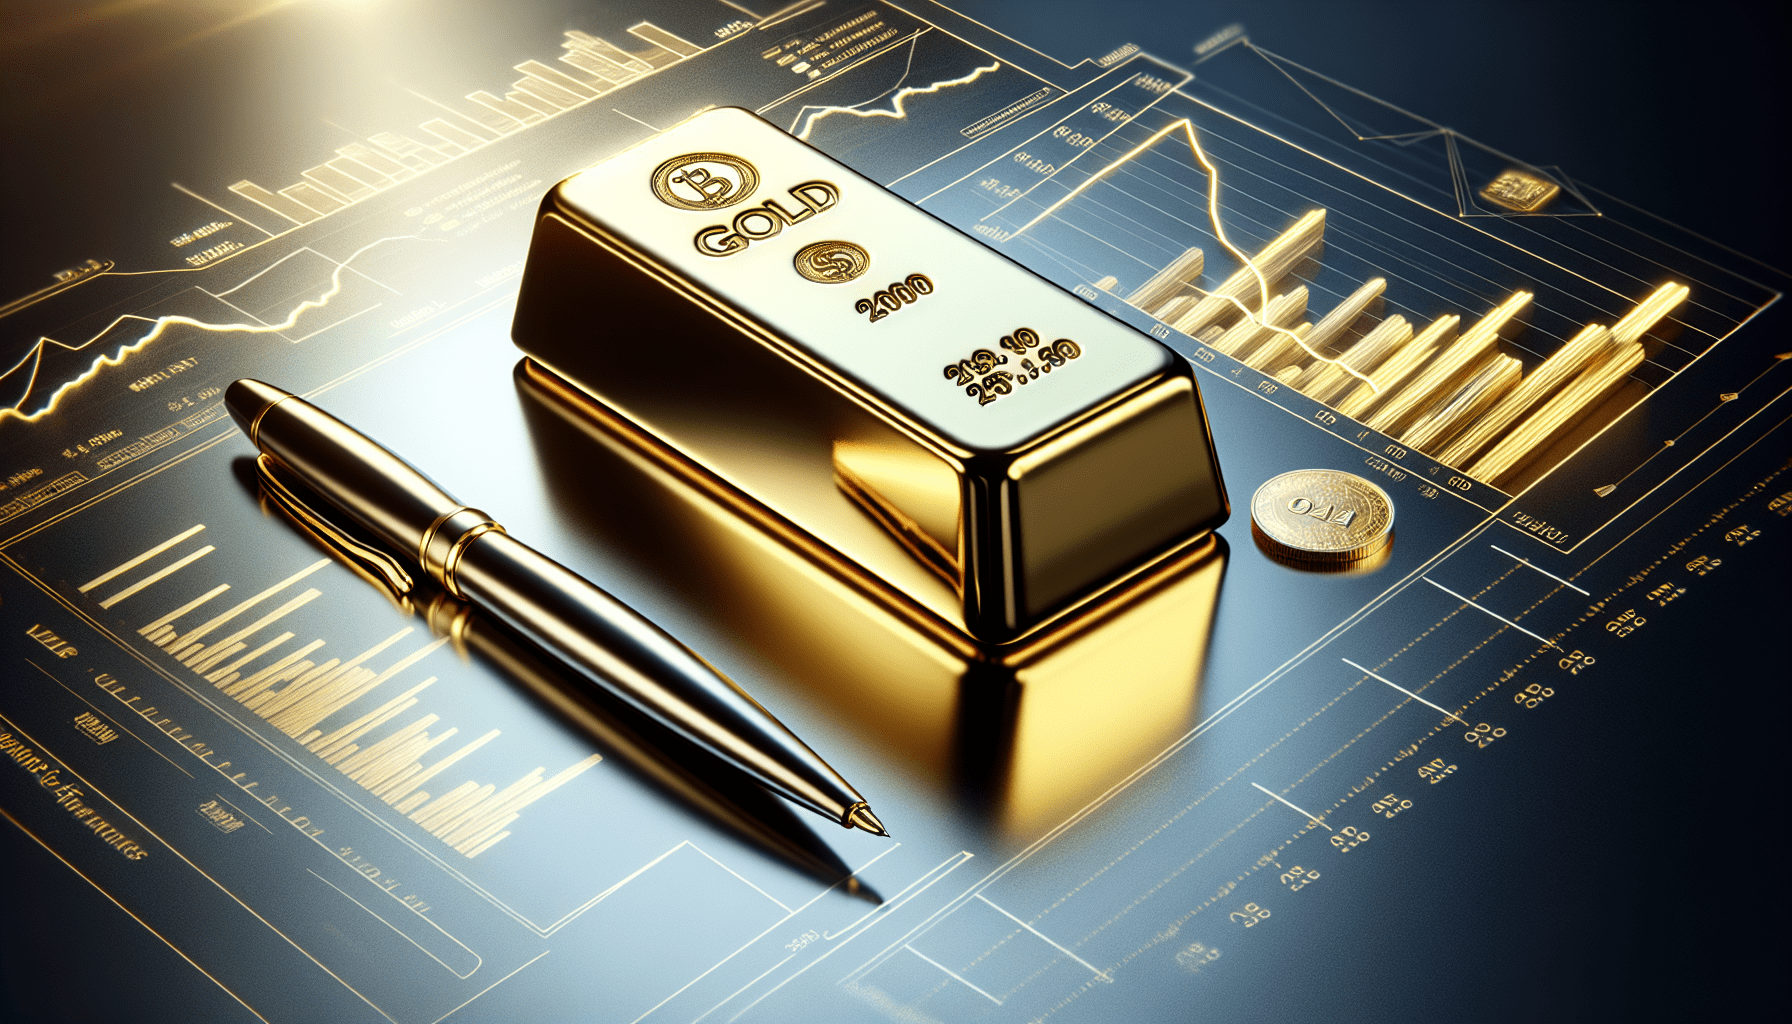 Which Banks Provide Regular Market Updates Or Research Reports For Gold Investors?